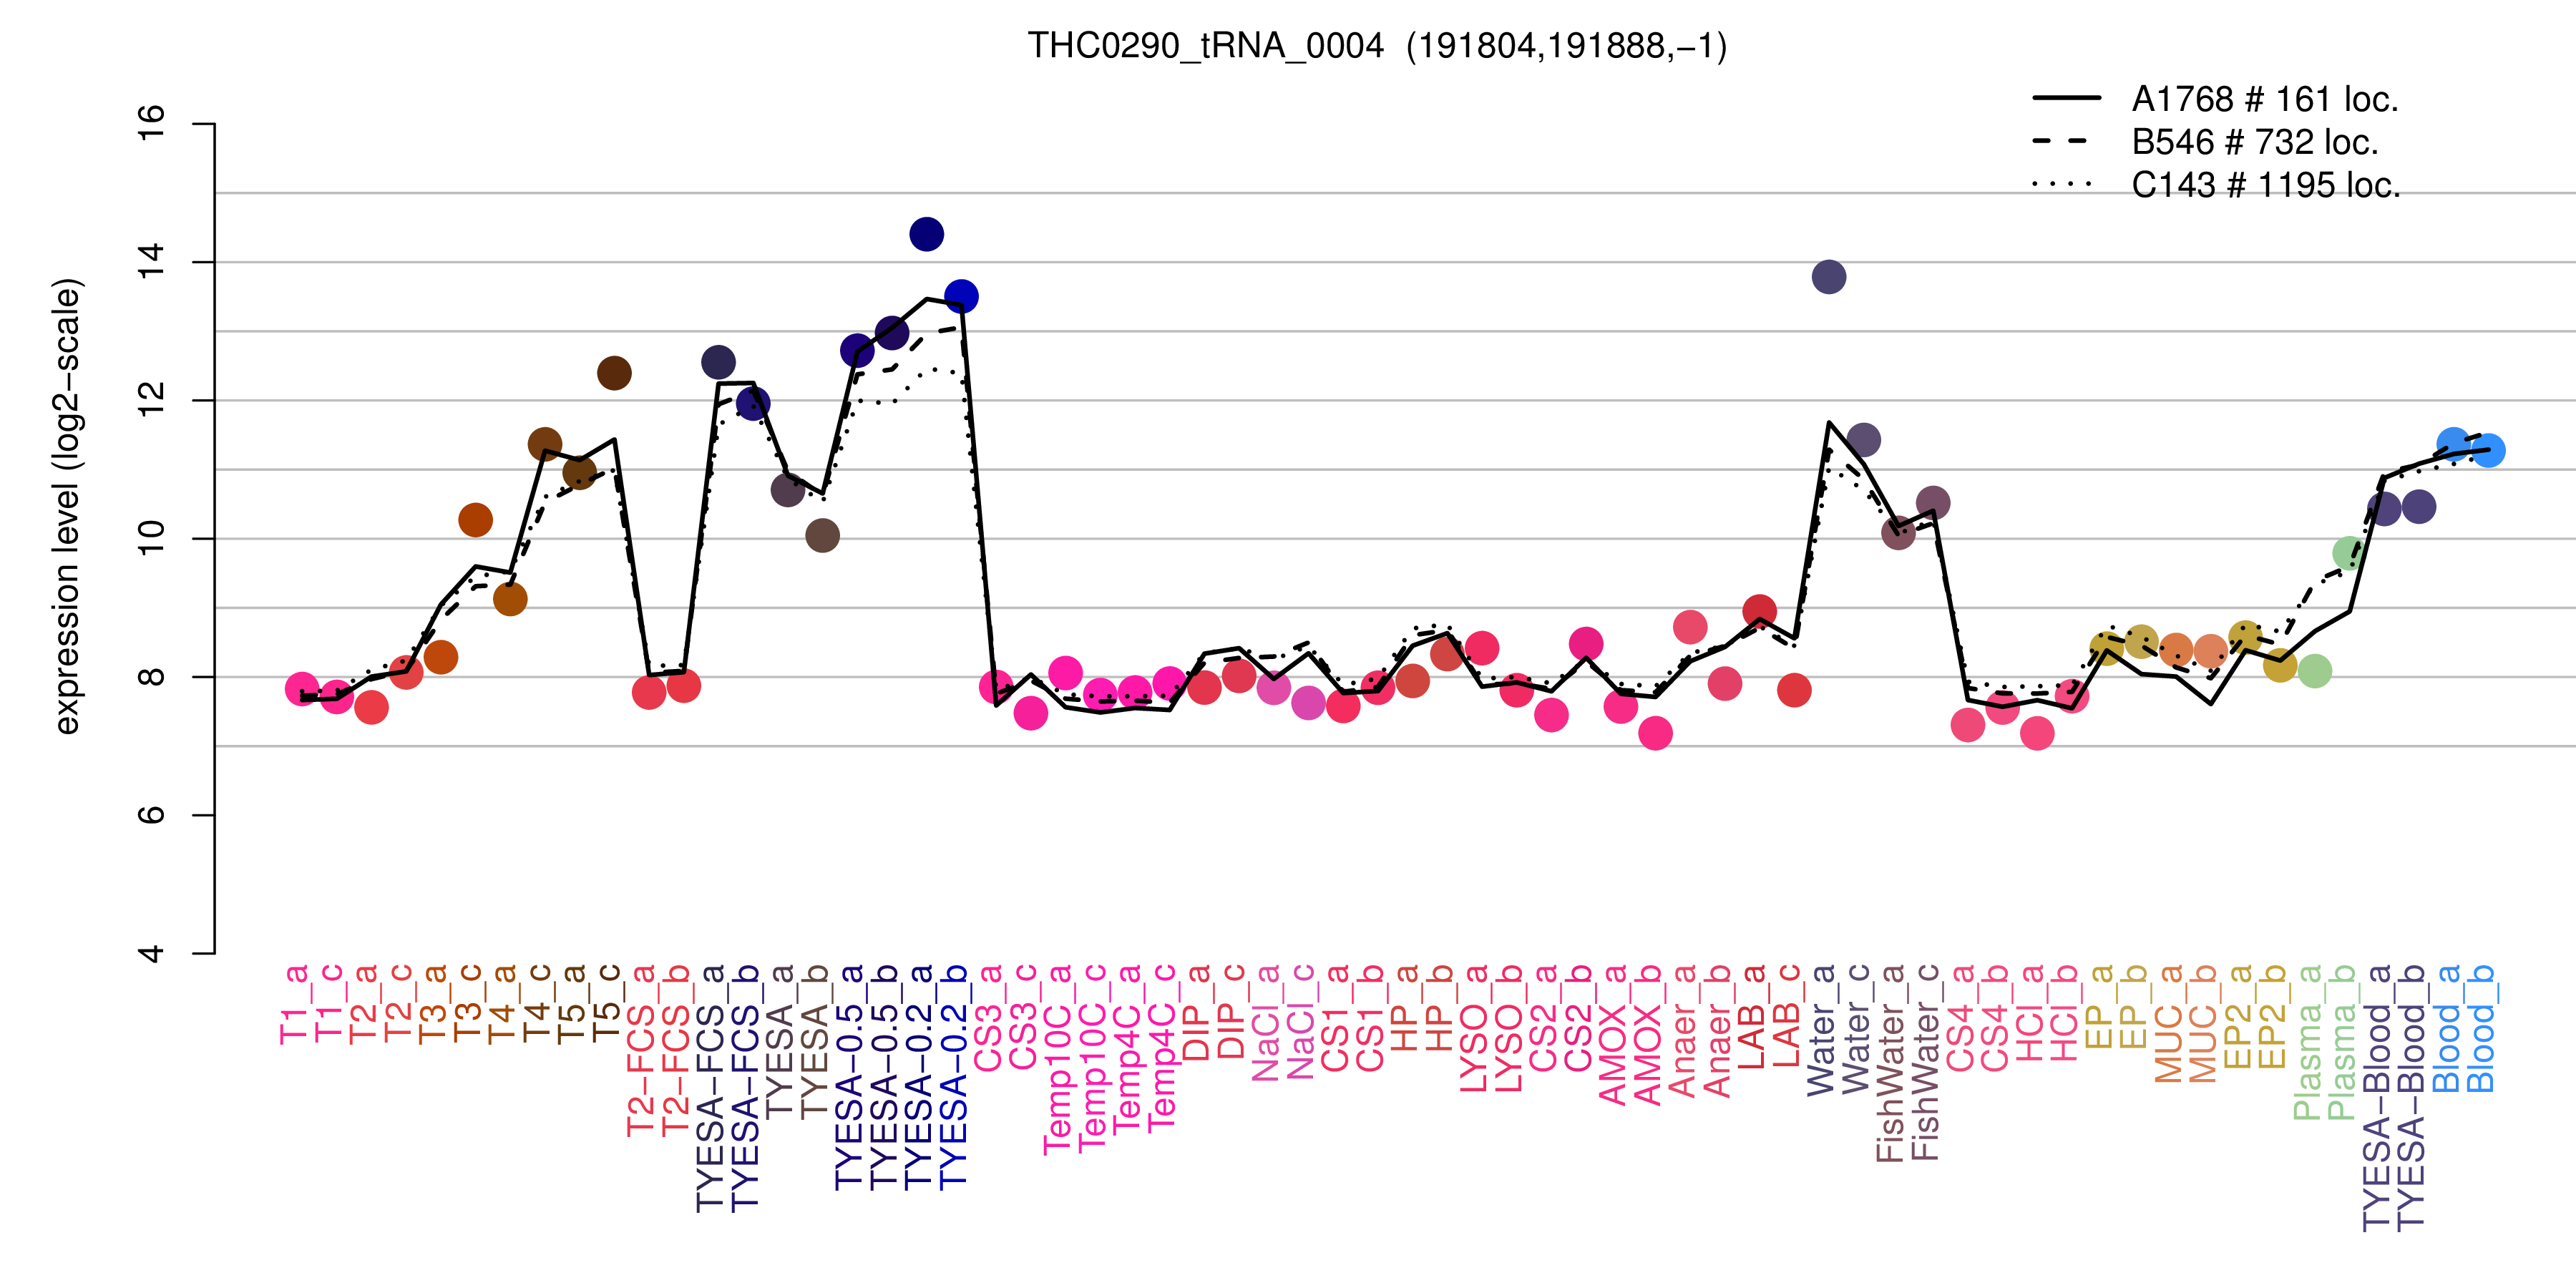 THC0290_tRNA_0004 expression levels among conditions